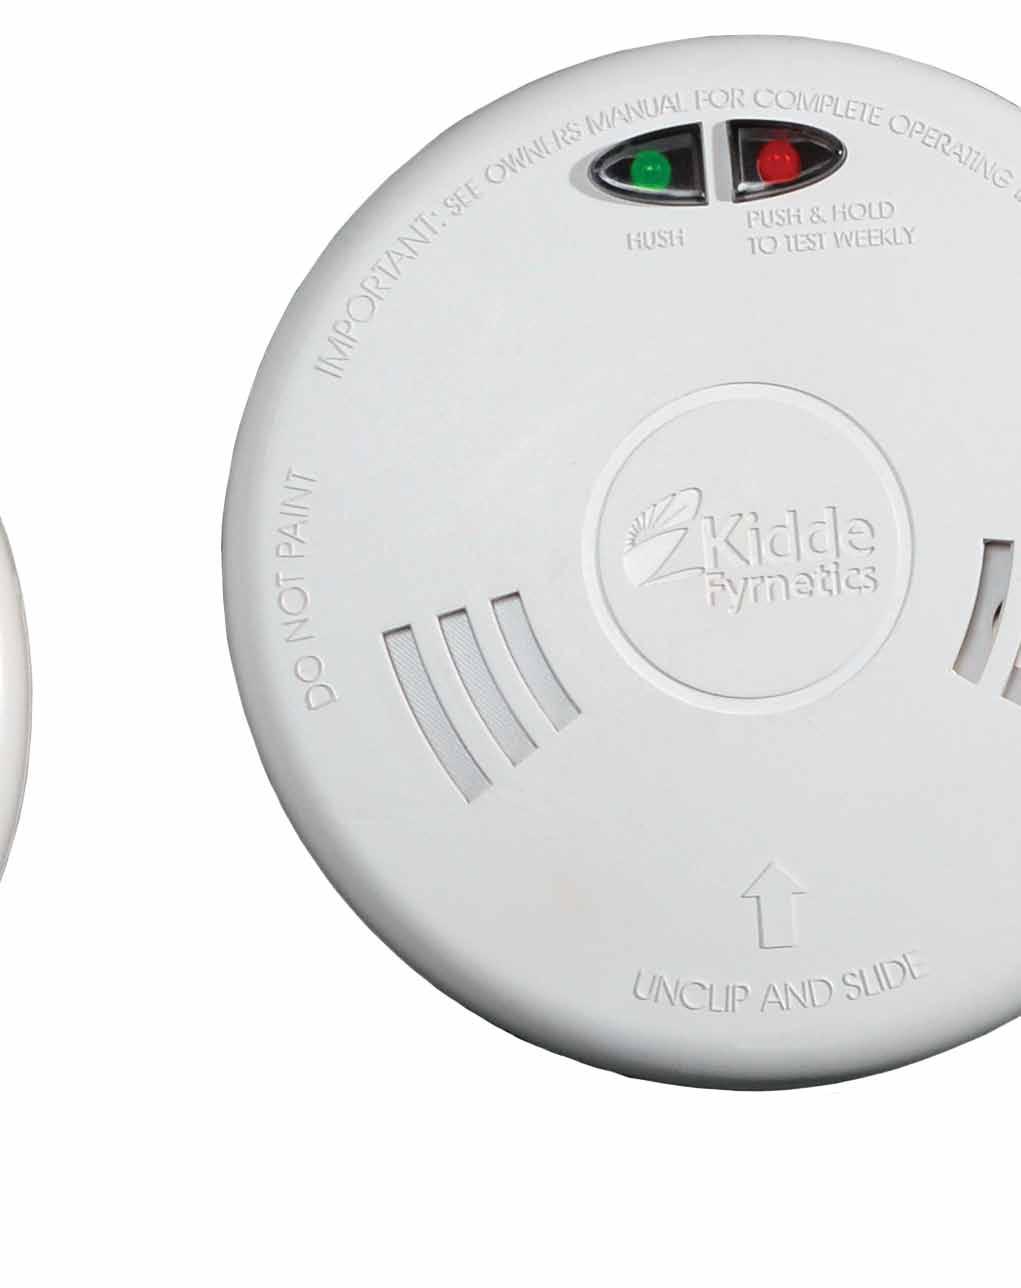 Models 1SFWR and 1SFW 230V Mains Fast-Fit Ionisation Smoke Alarms Technical Specification Sensor Ionisation, metallic chamber with 24 number slot entry inlet portals Sensitivity Complies with BS EN